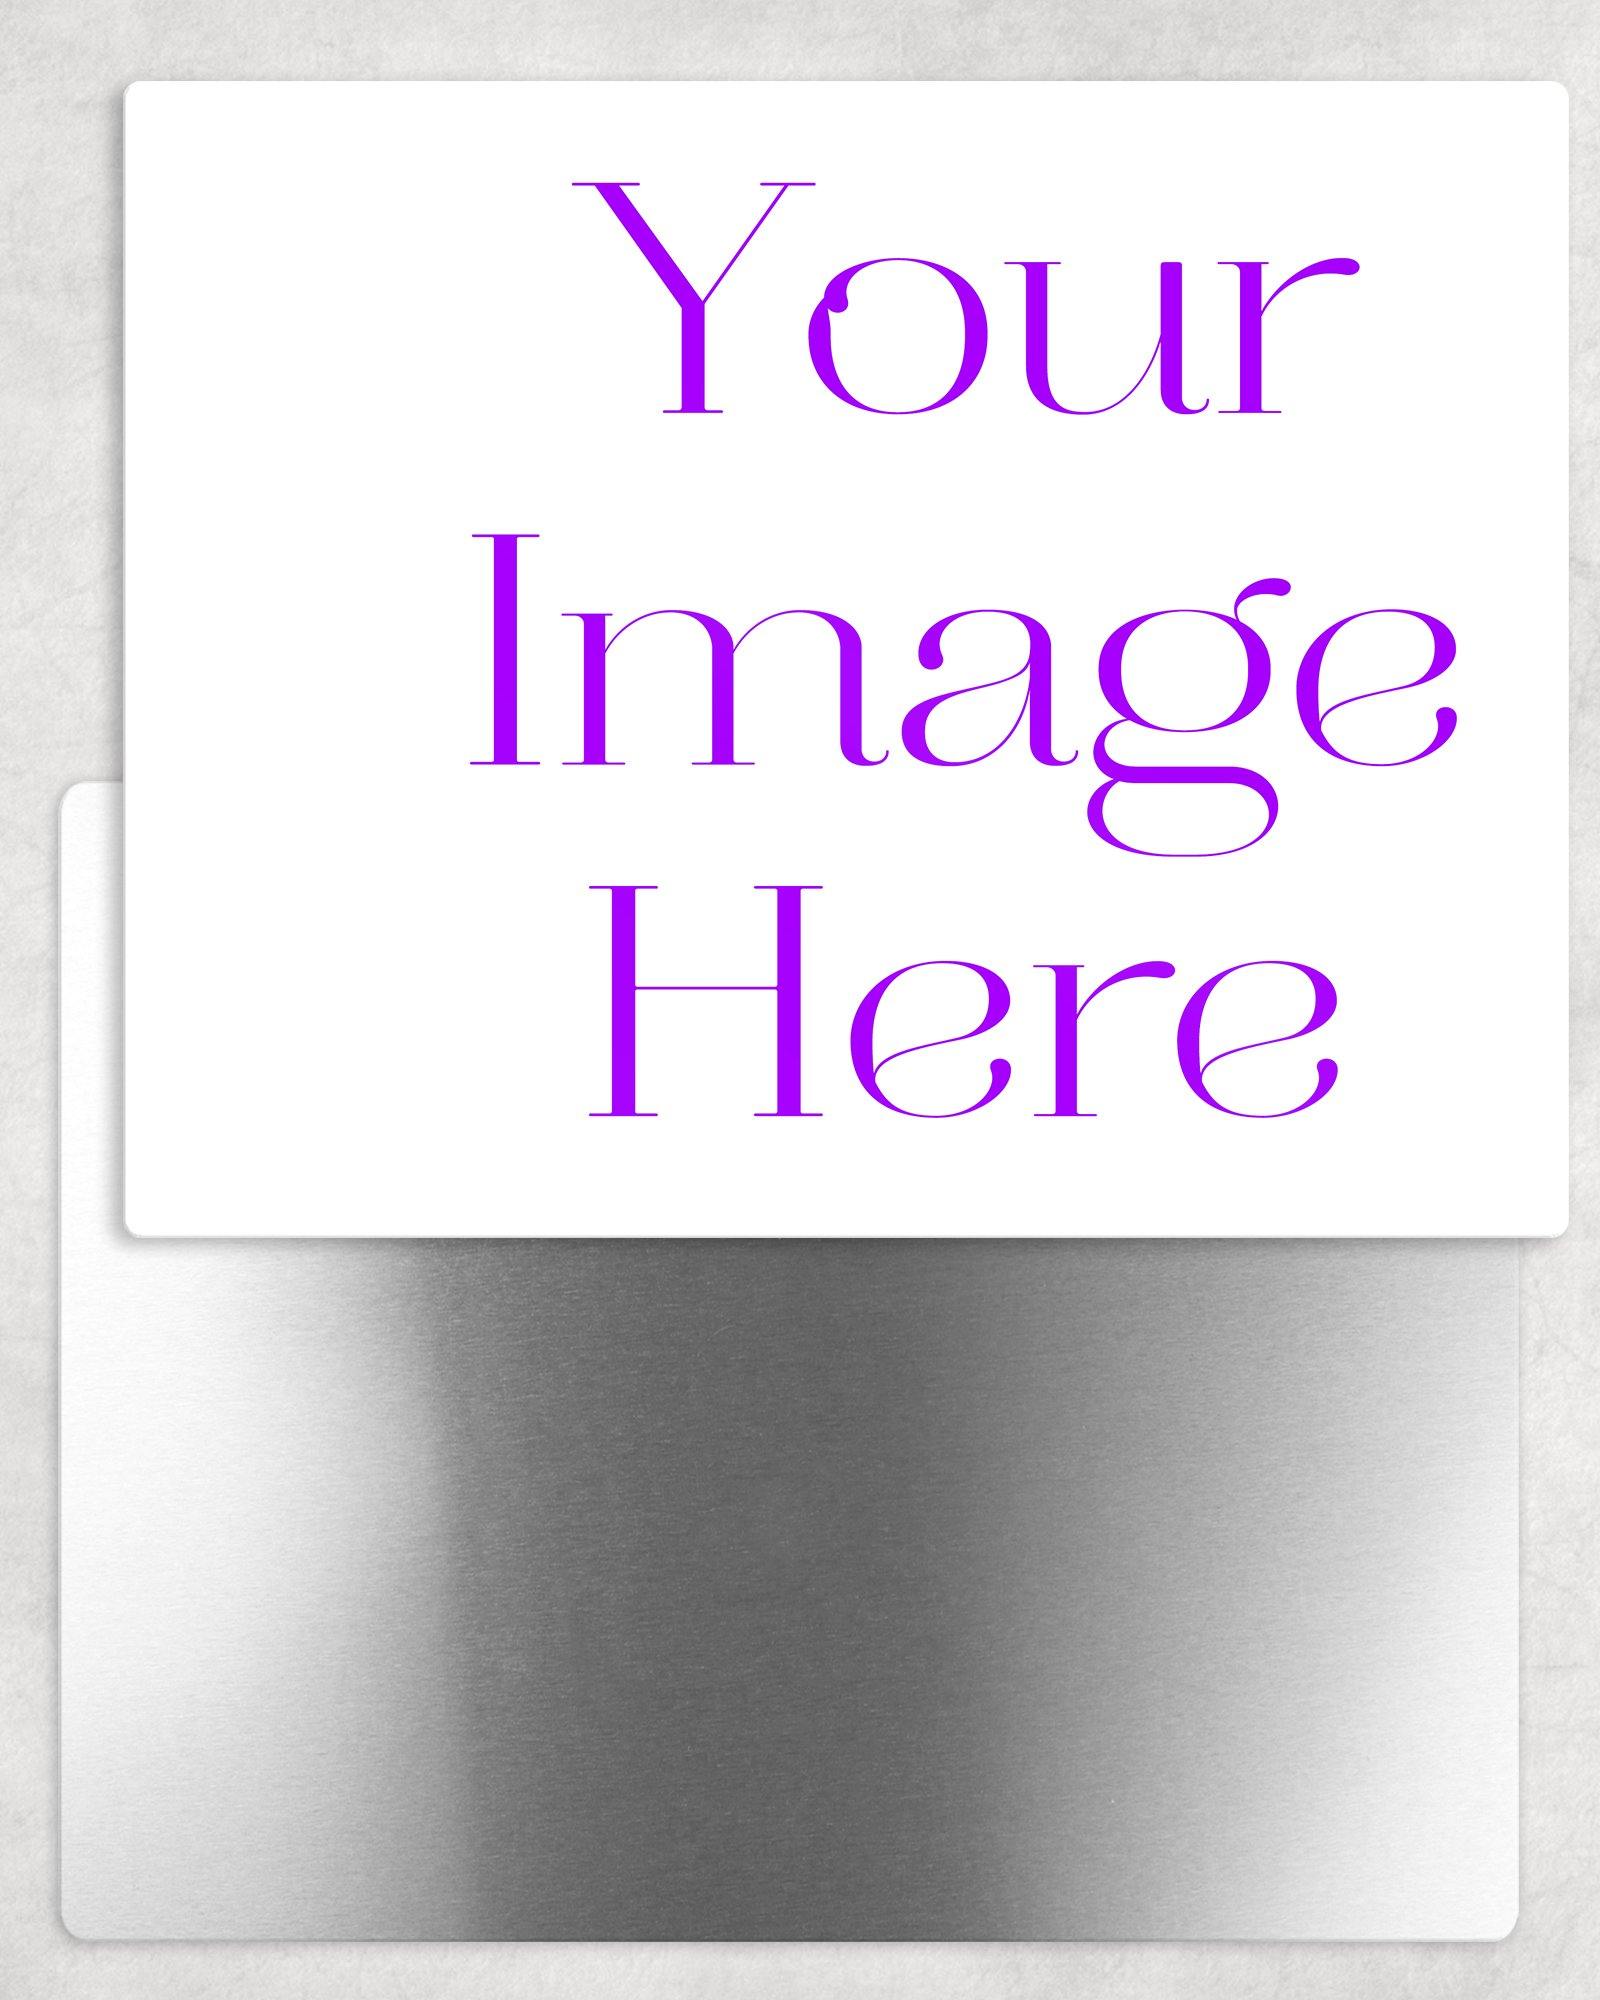 Create Your Own Metal Photo Panel - Landscape 8x10 - Schoppix Gifts